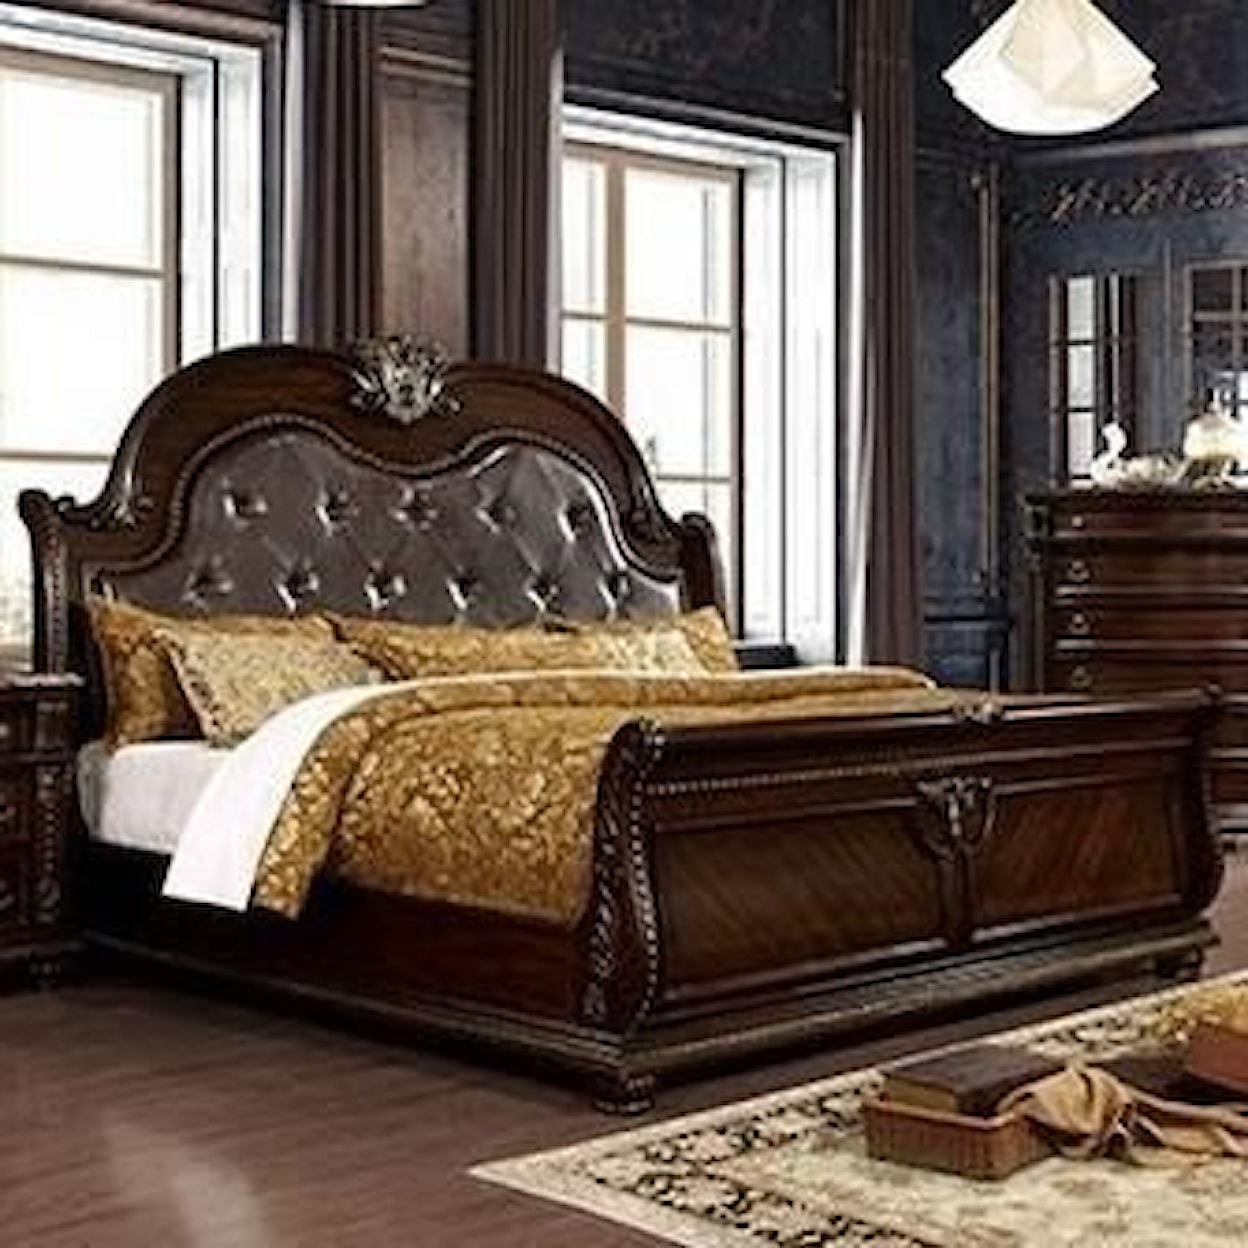 Furniture of America Fromberg King Bed